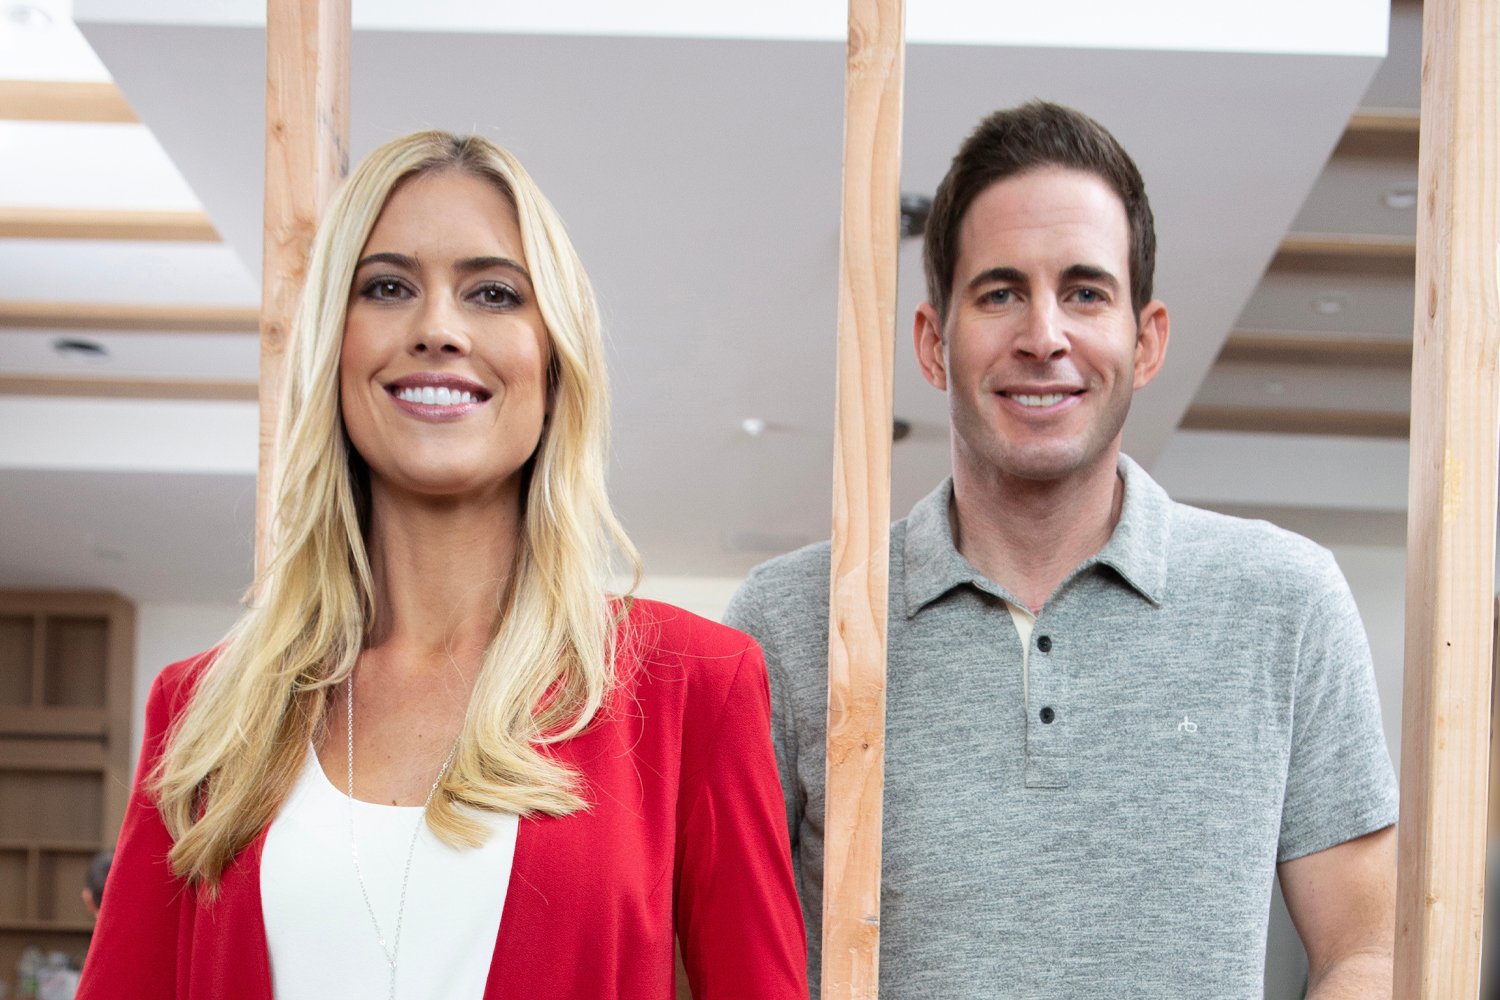 Christina Haack and Tarek El Mousa in a 'Flip or Flop' promo photo